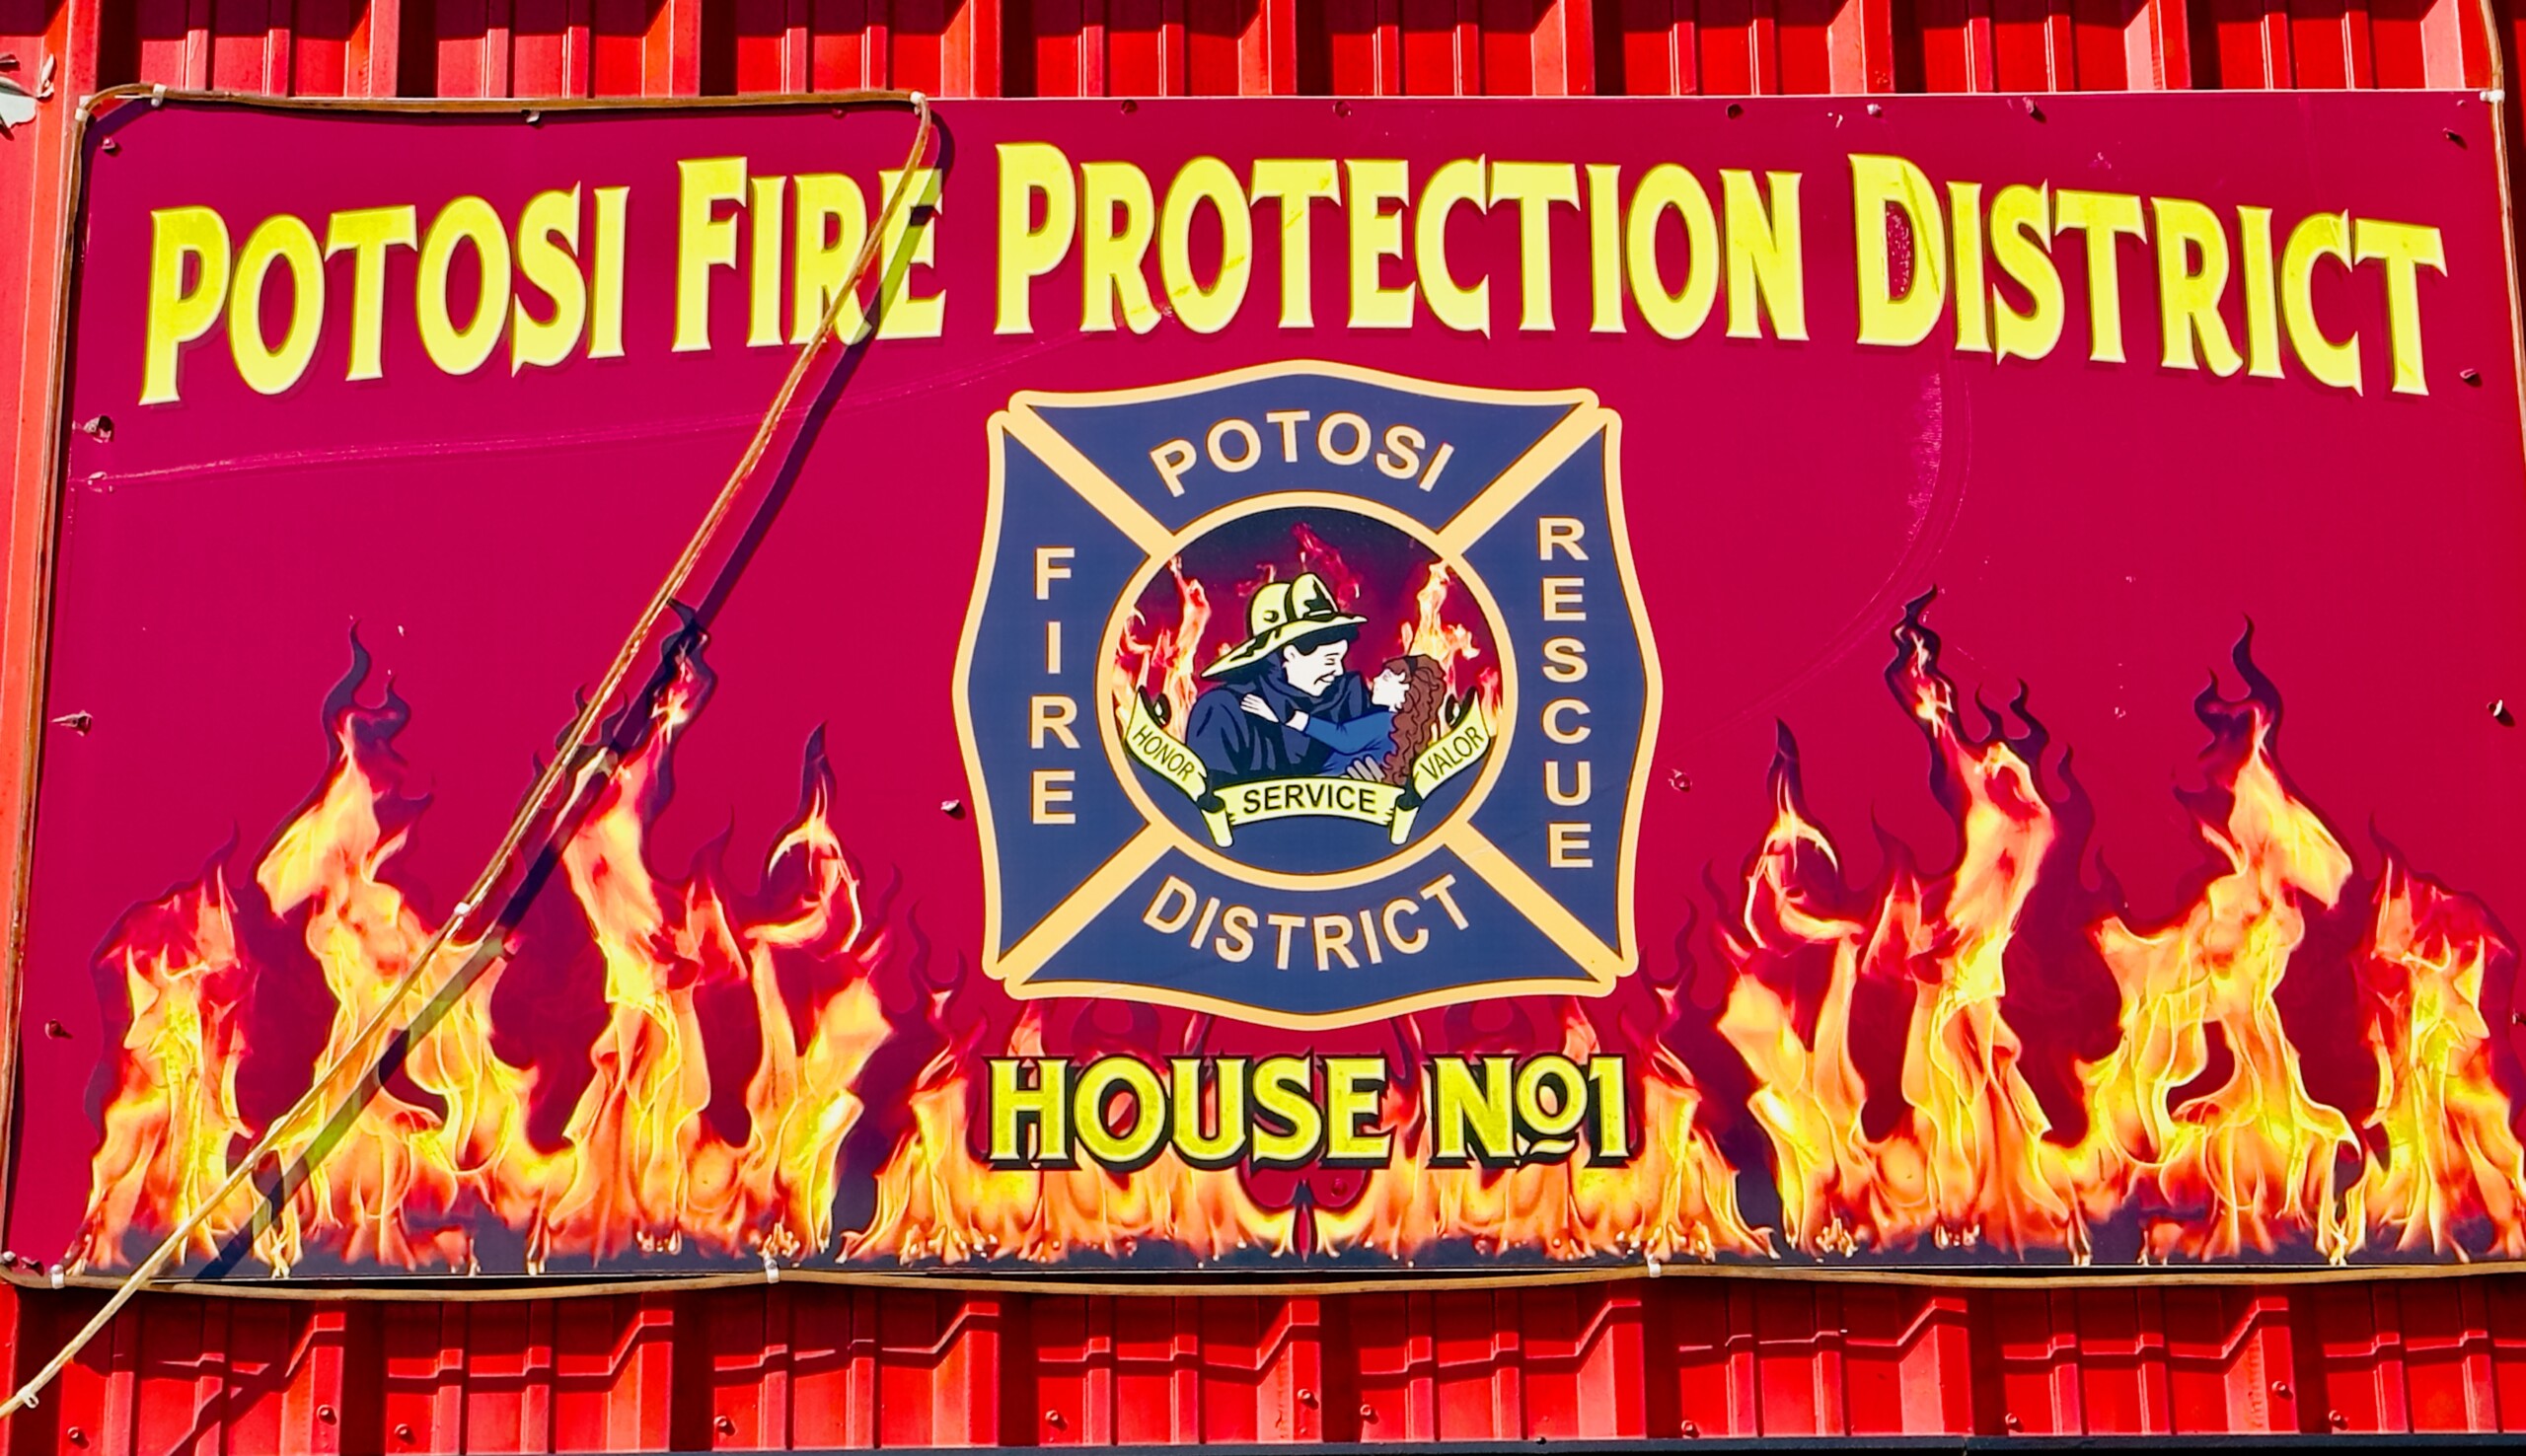 Sign saying Potosi Fire Protection District